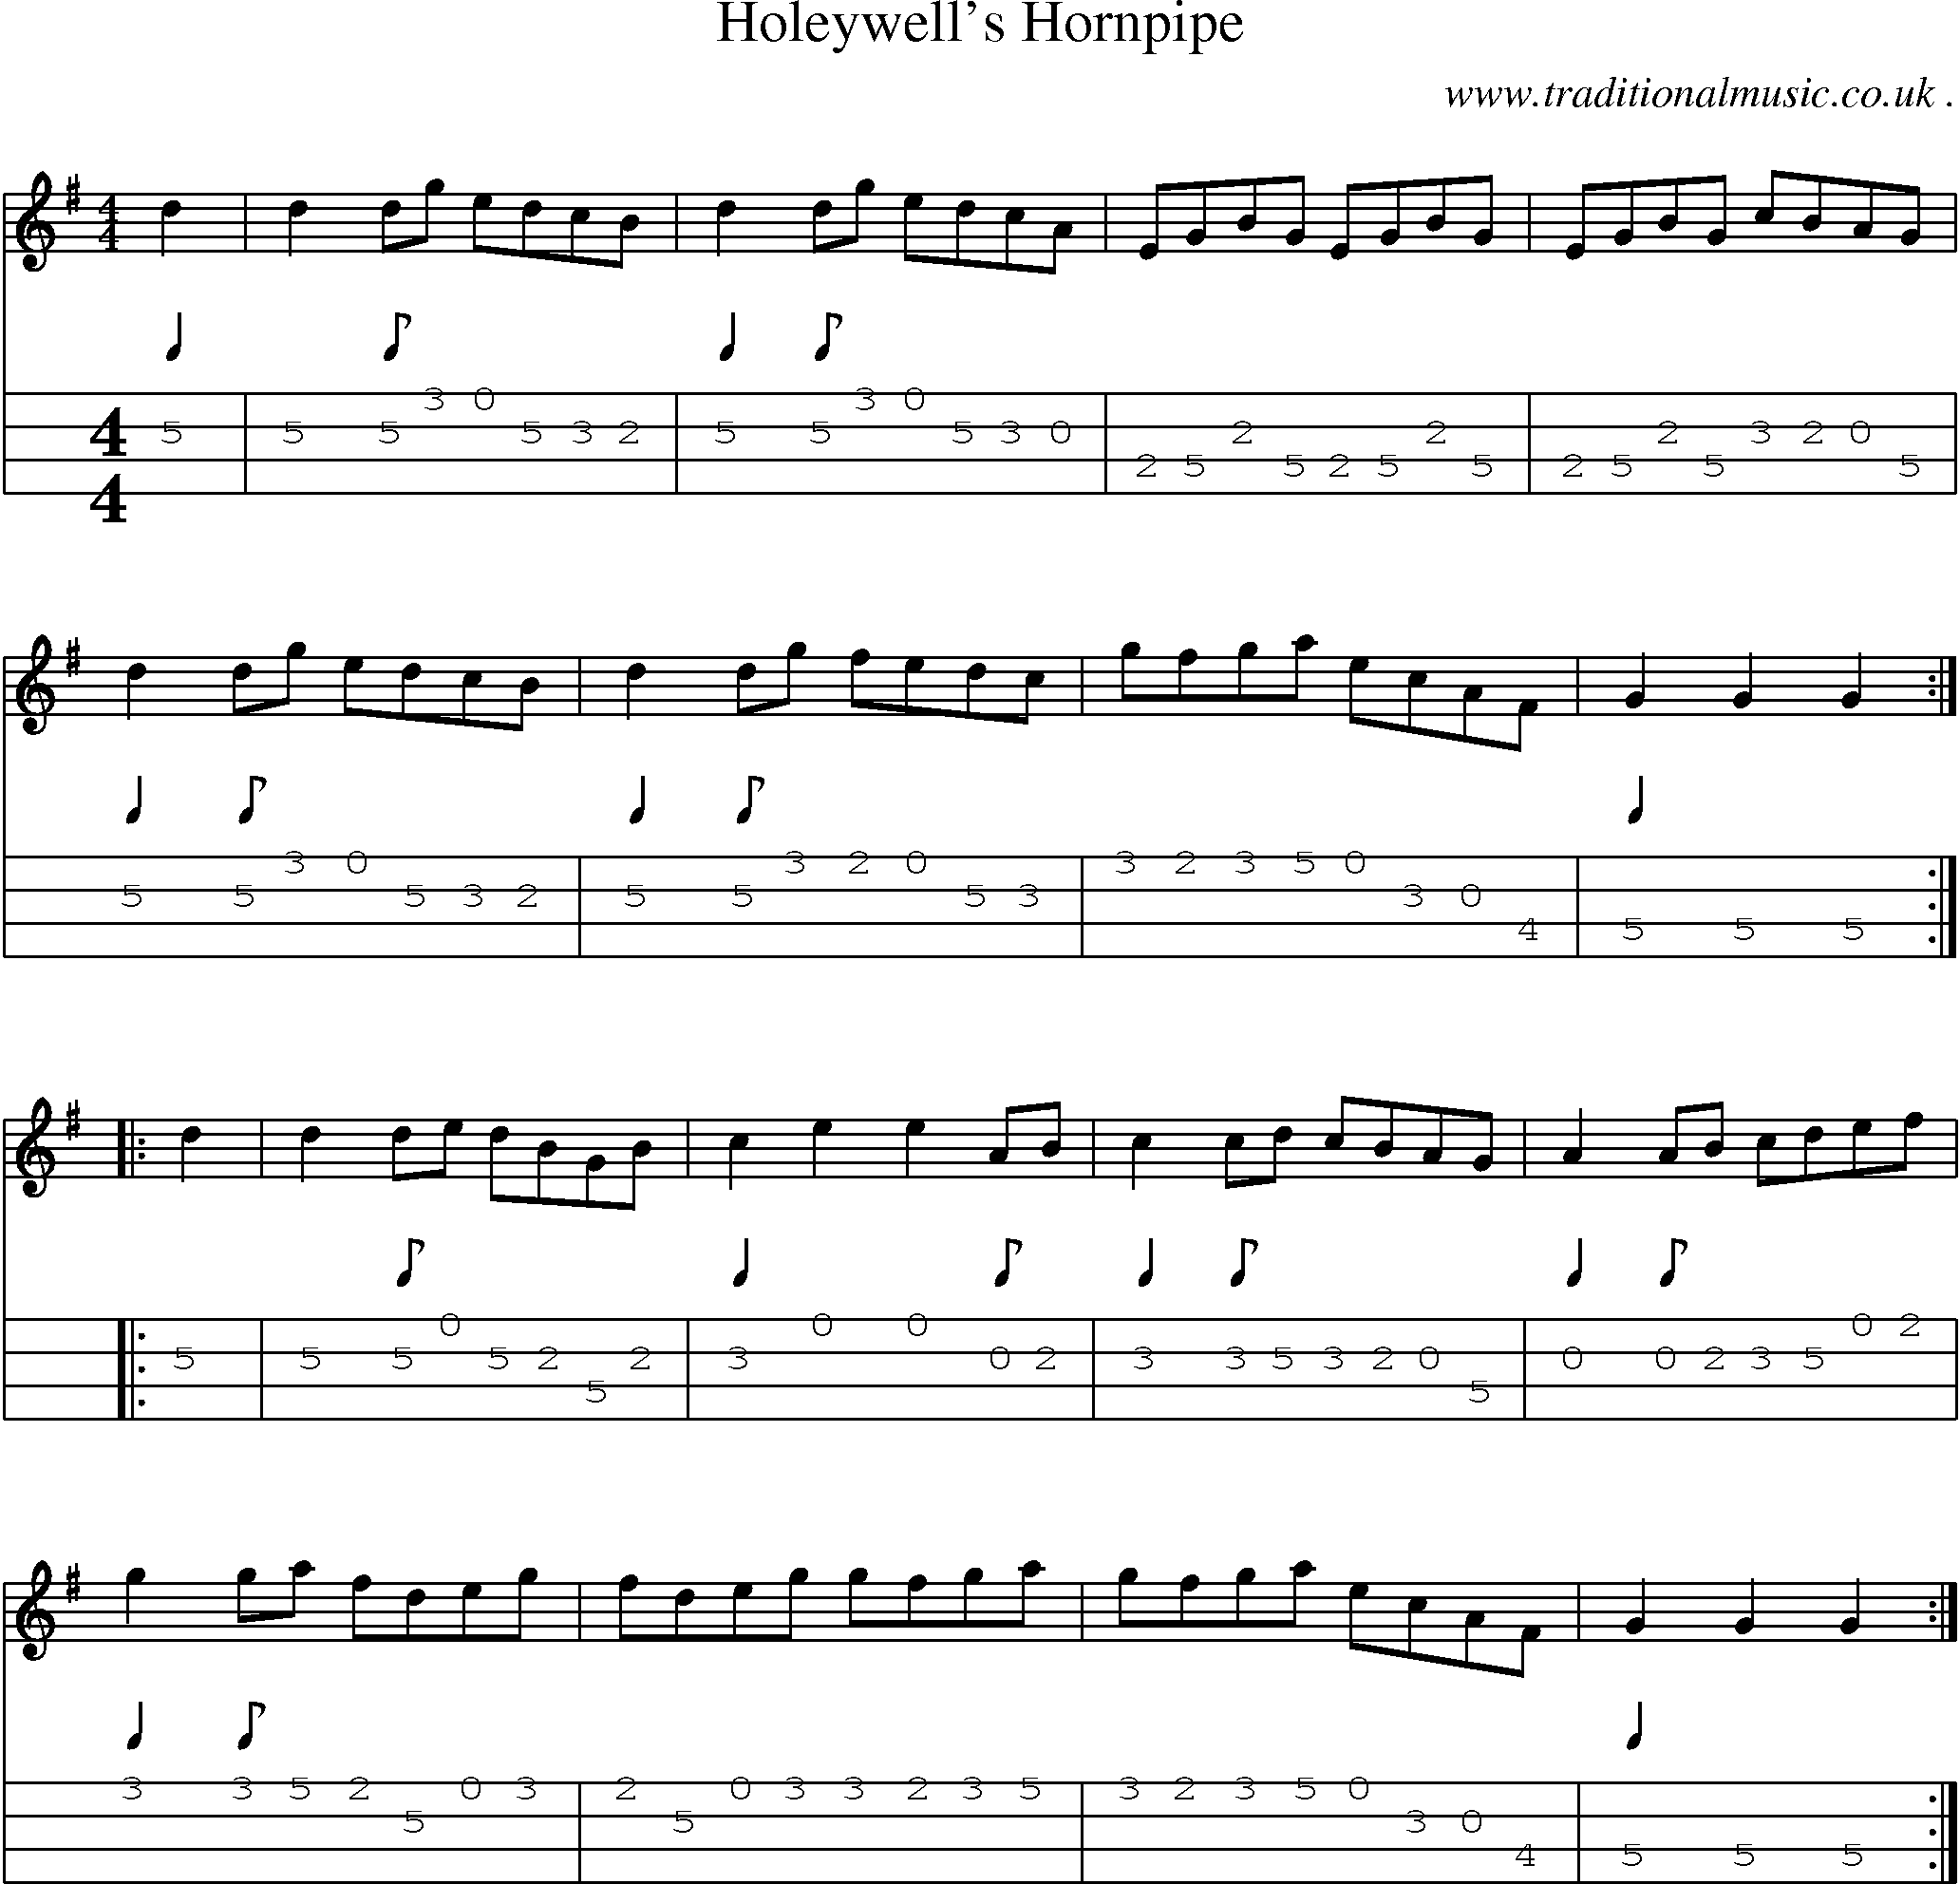 Sheet-Music and Mandolin Tabs for Holeywells Hornpipe